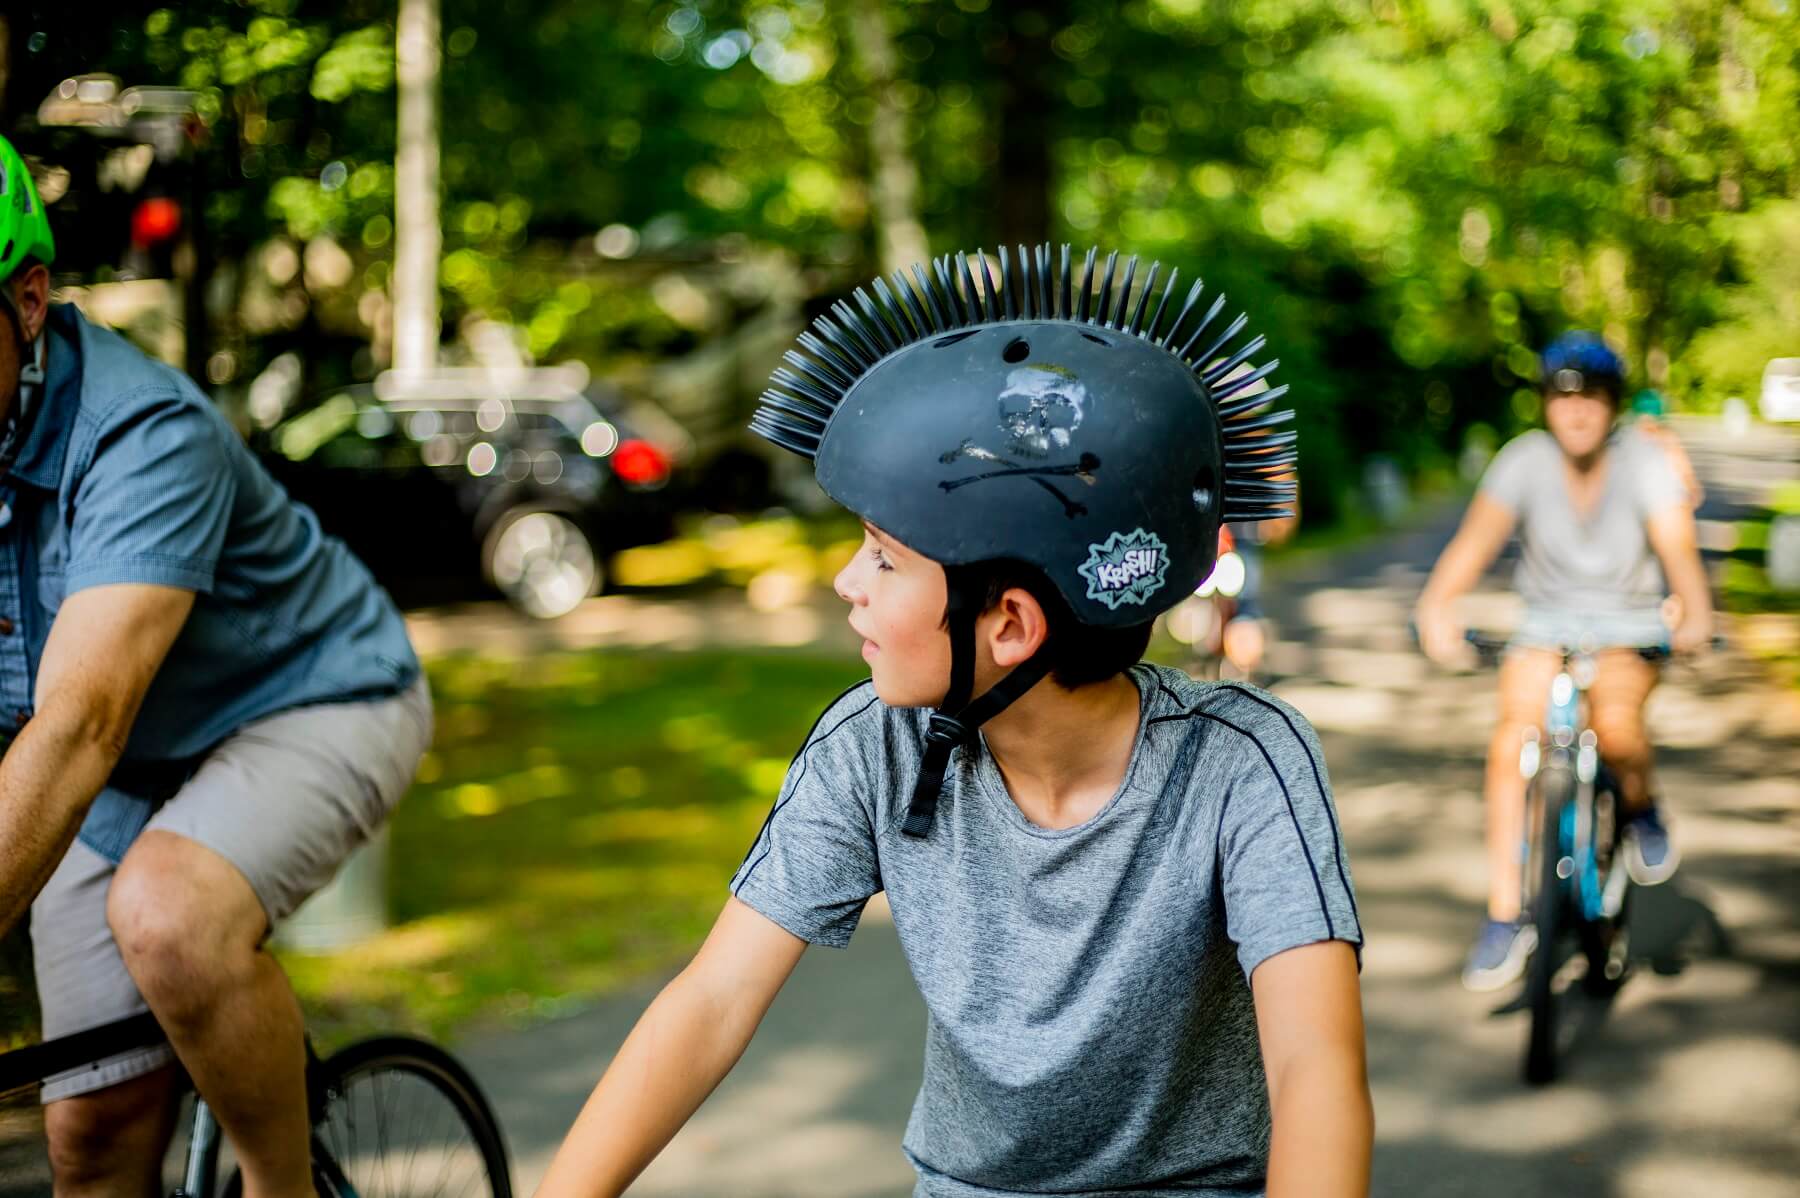 Young boy on his bike wearing a spiky helmet